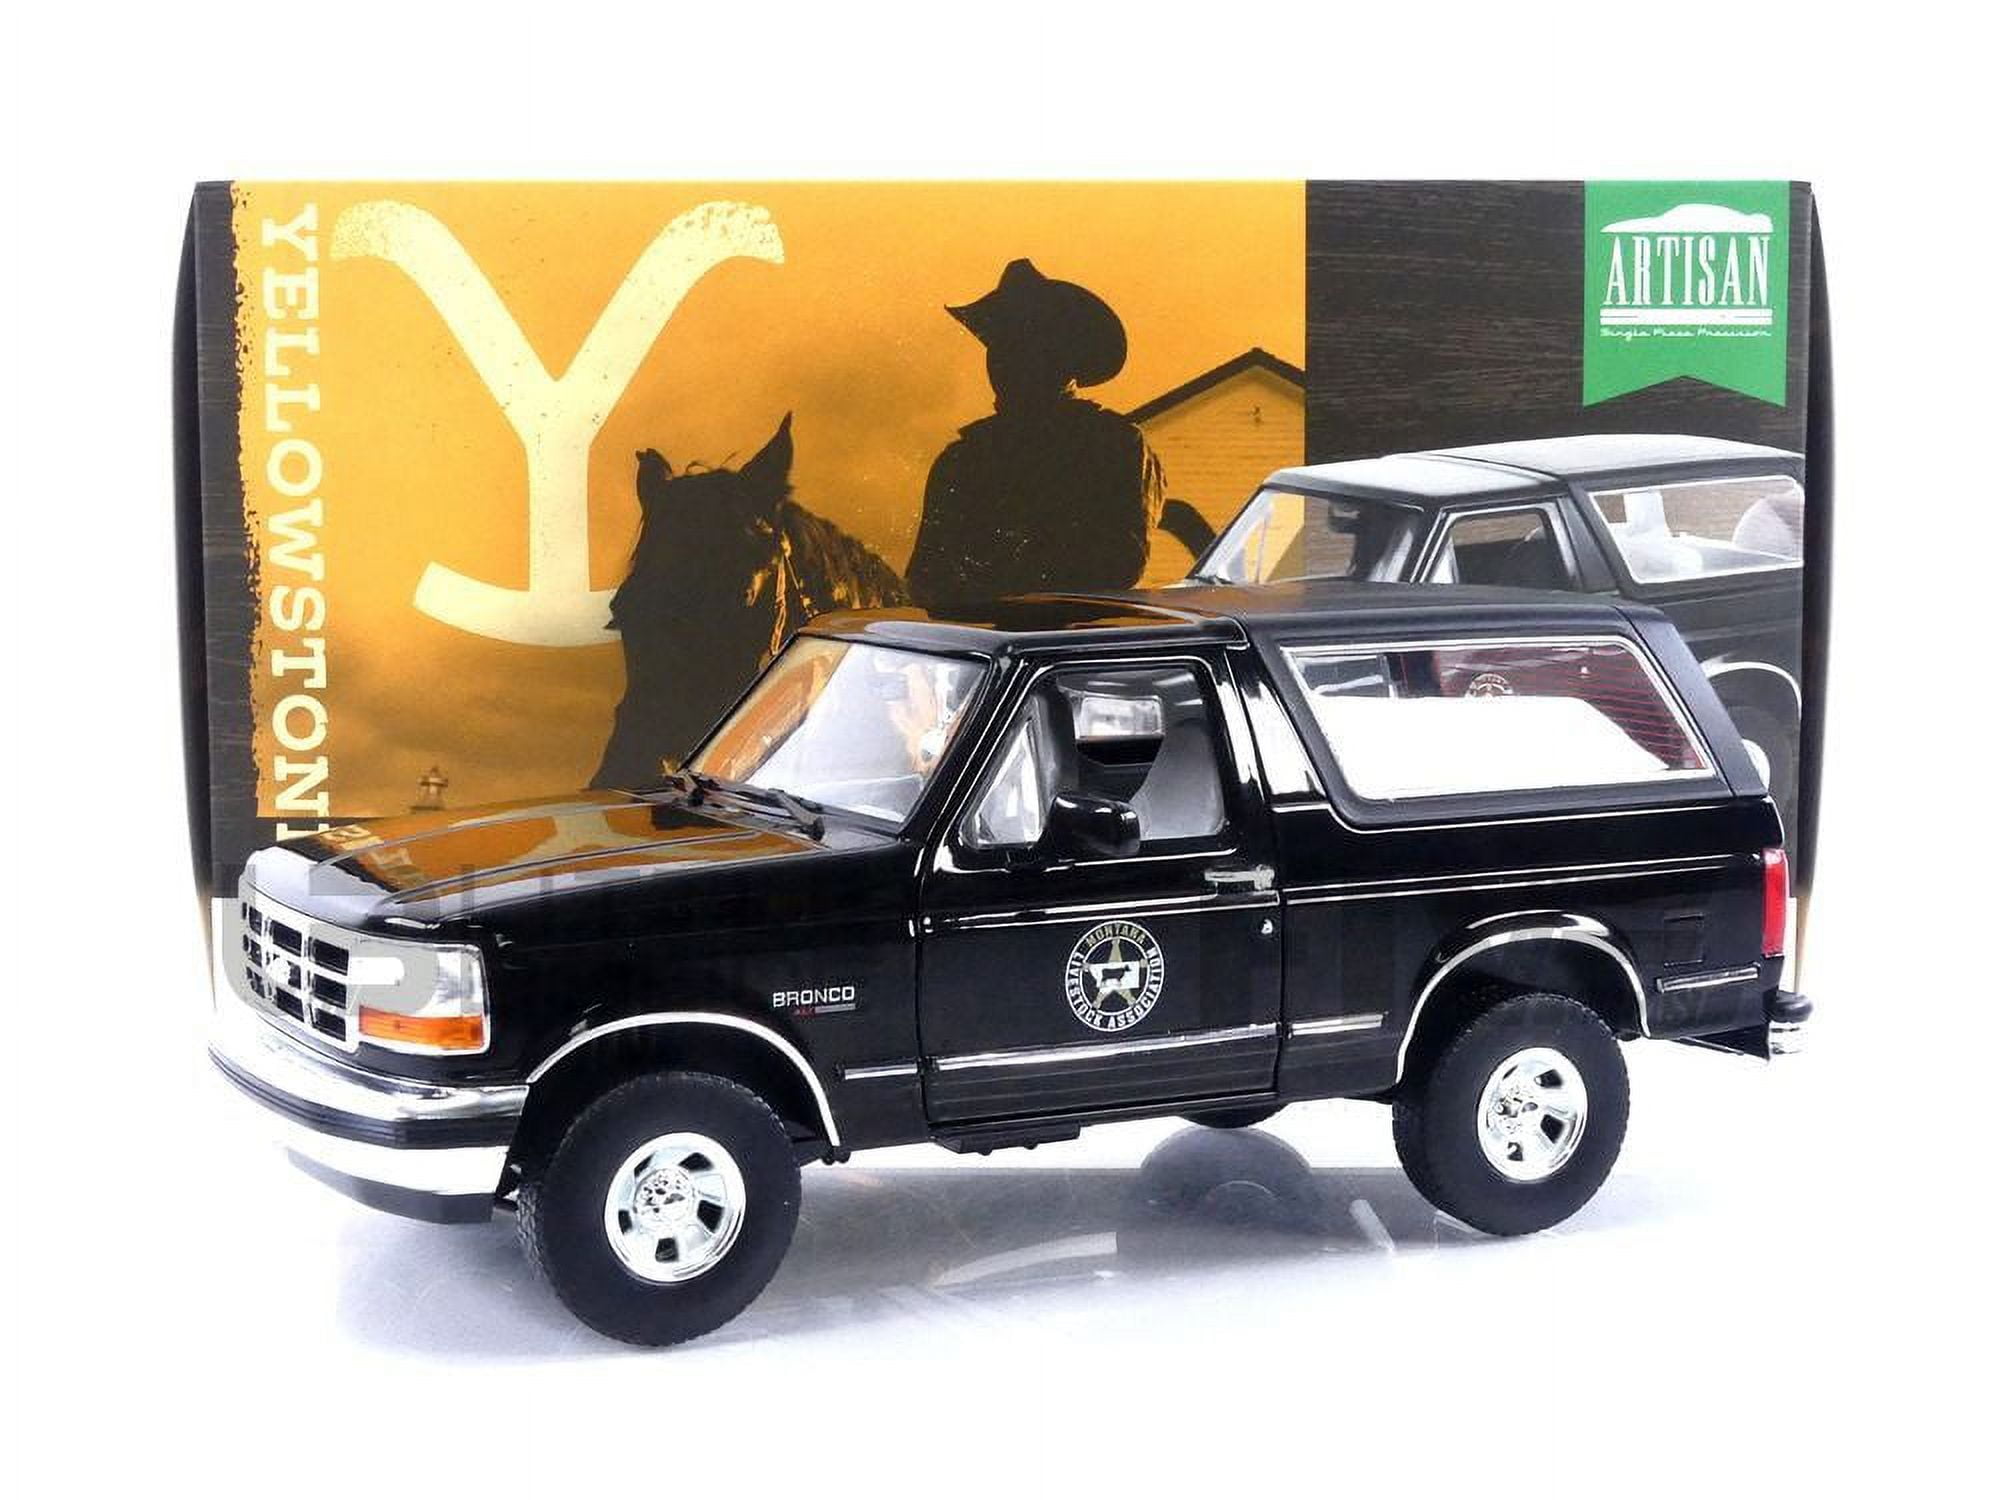 GL19130 1992 Ford Bronco Montana Livestock Association Yellowstone 2018-Current TV Series Artisan Collection 1 by 18 Scale Diecast Model Car, Black -  GreenLight